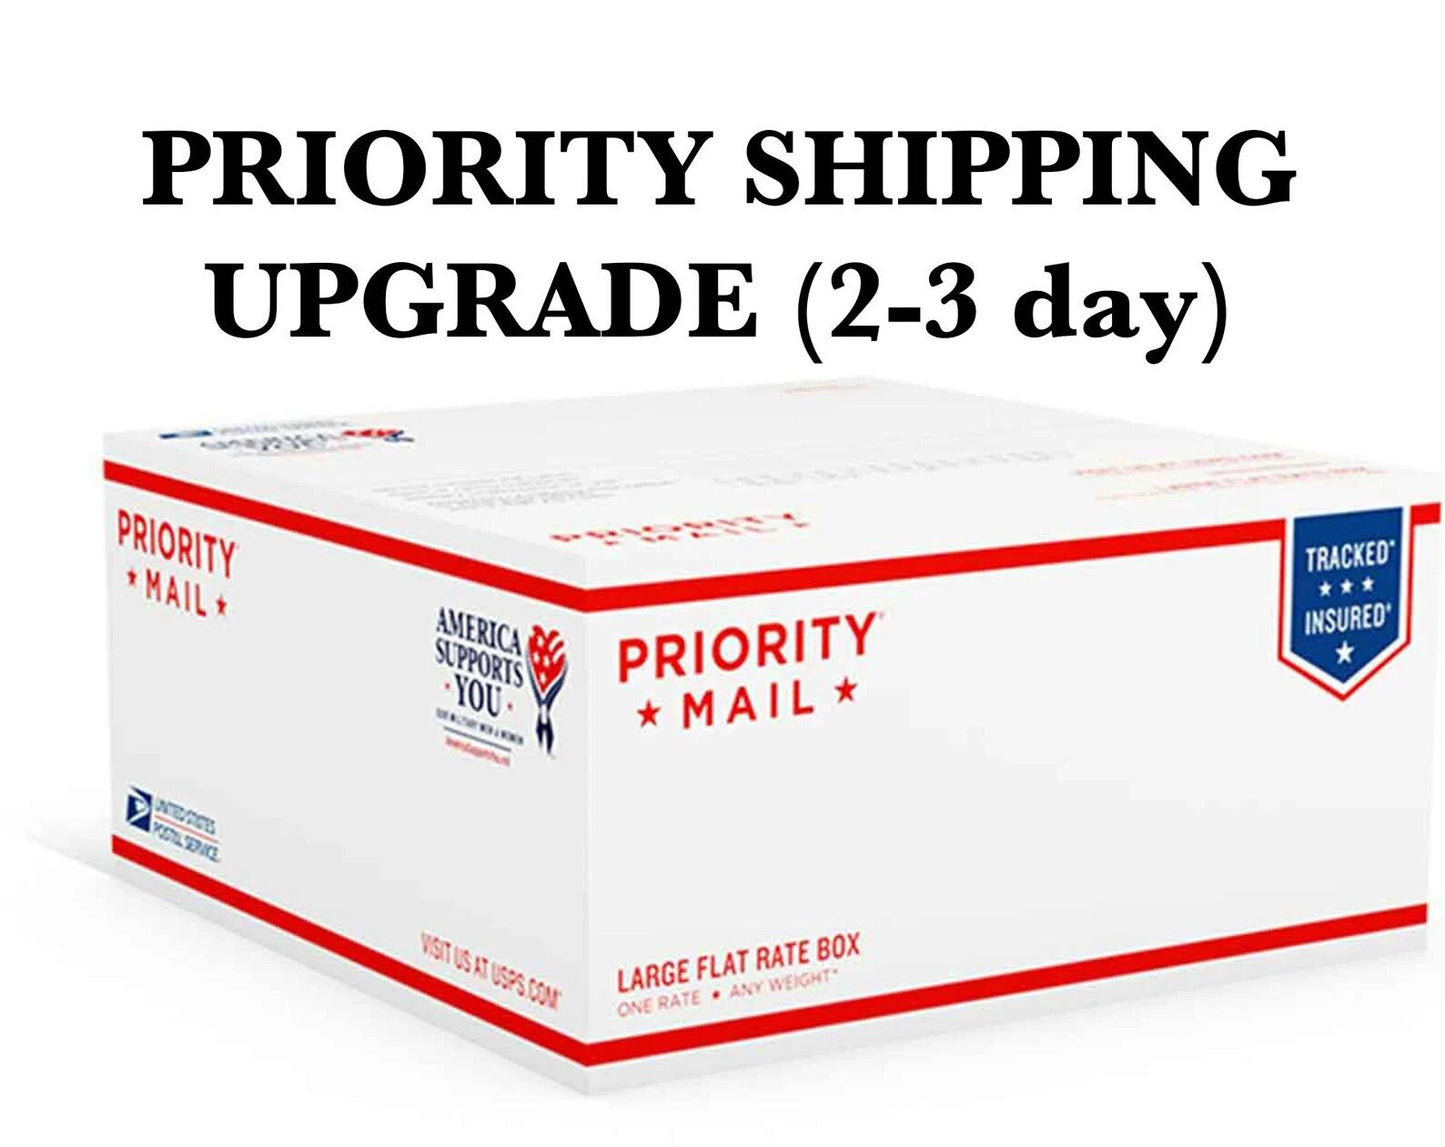 Sara Order- 9 packages Re-Shipped